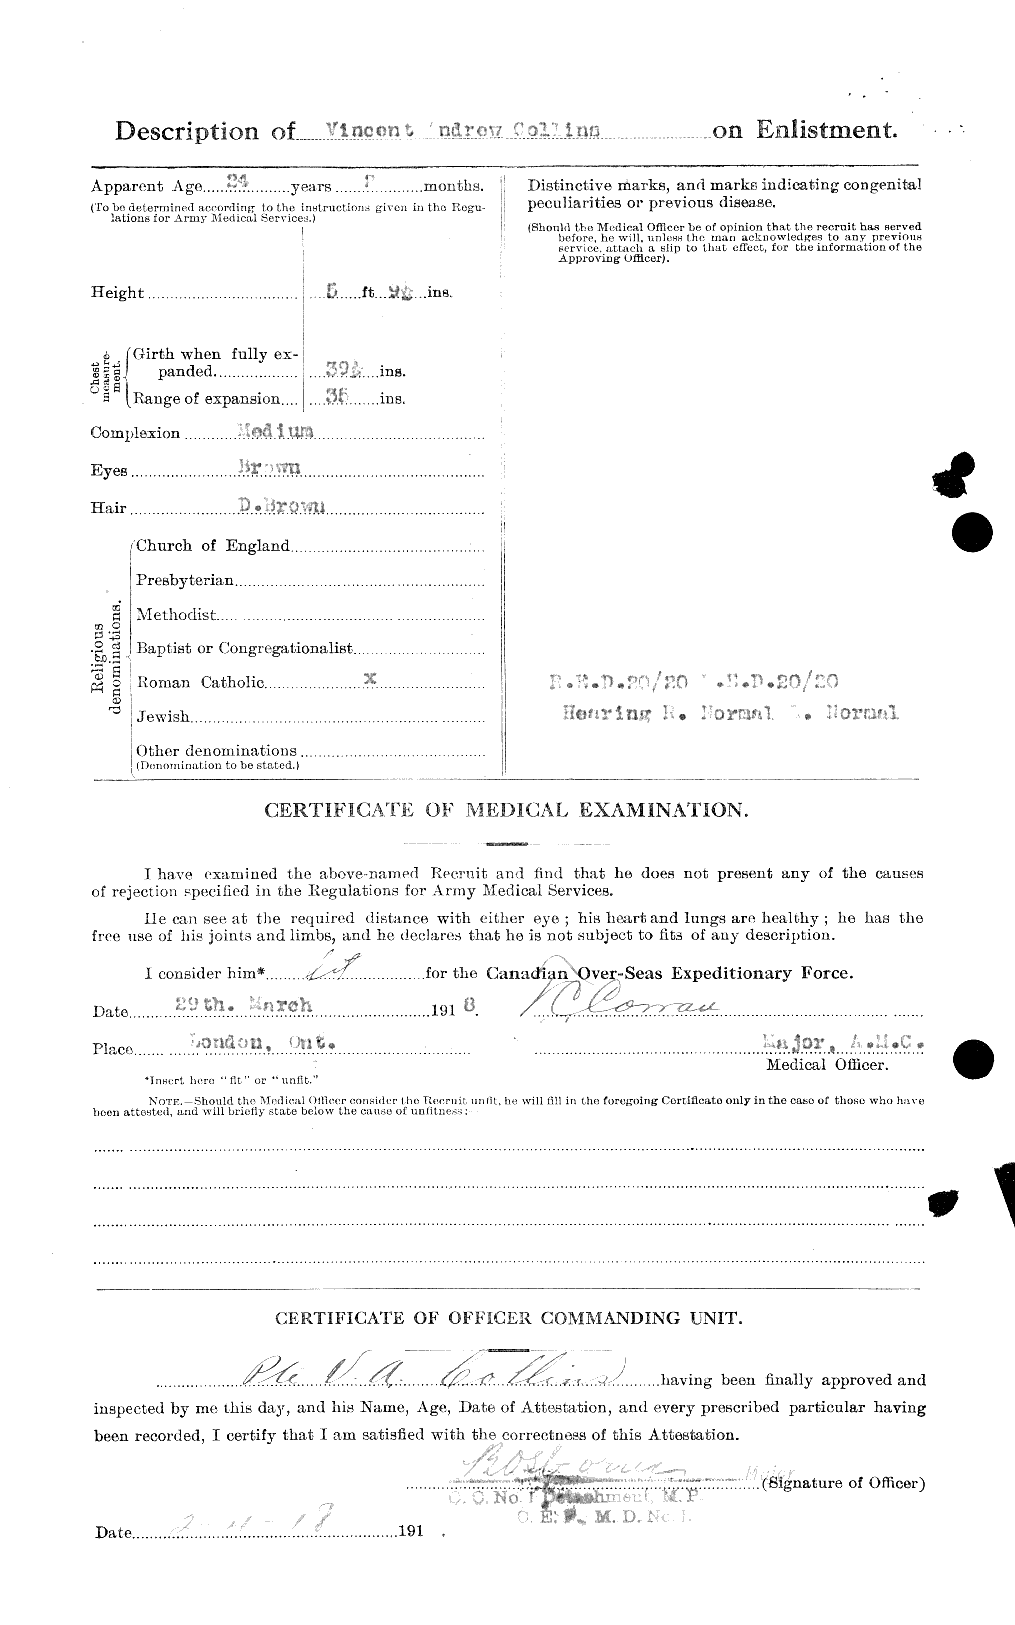 Personnel Records of the First World War - CEF 040685b